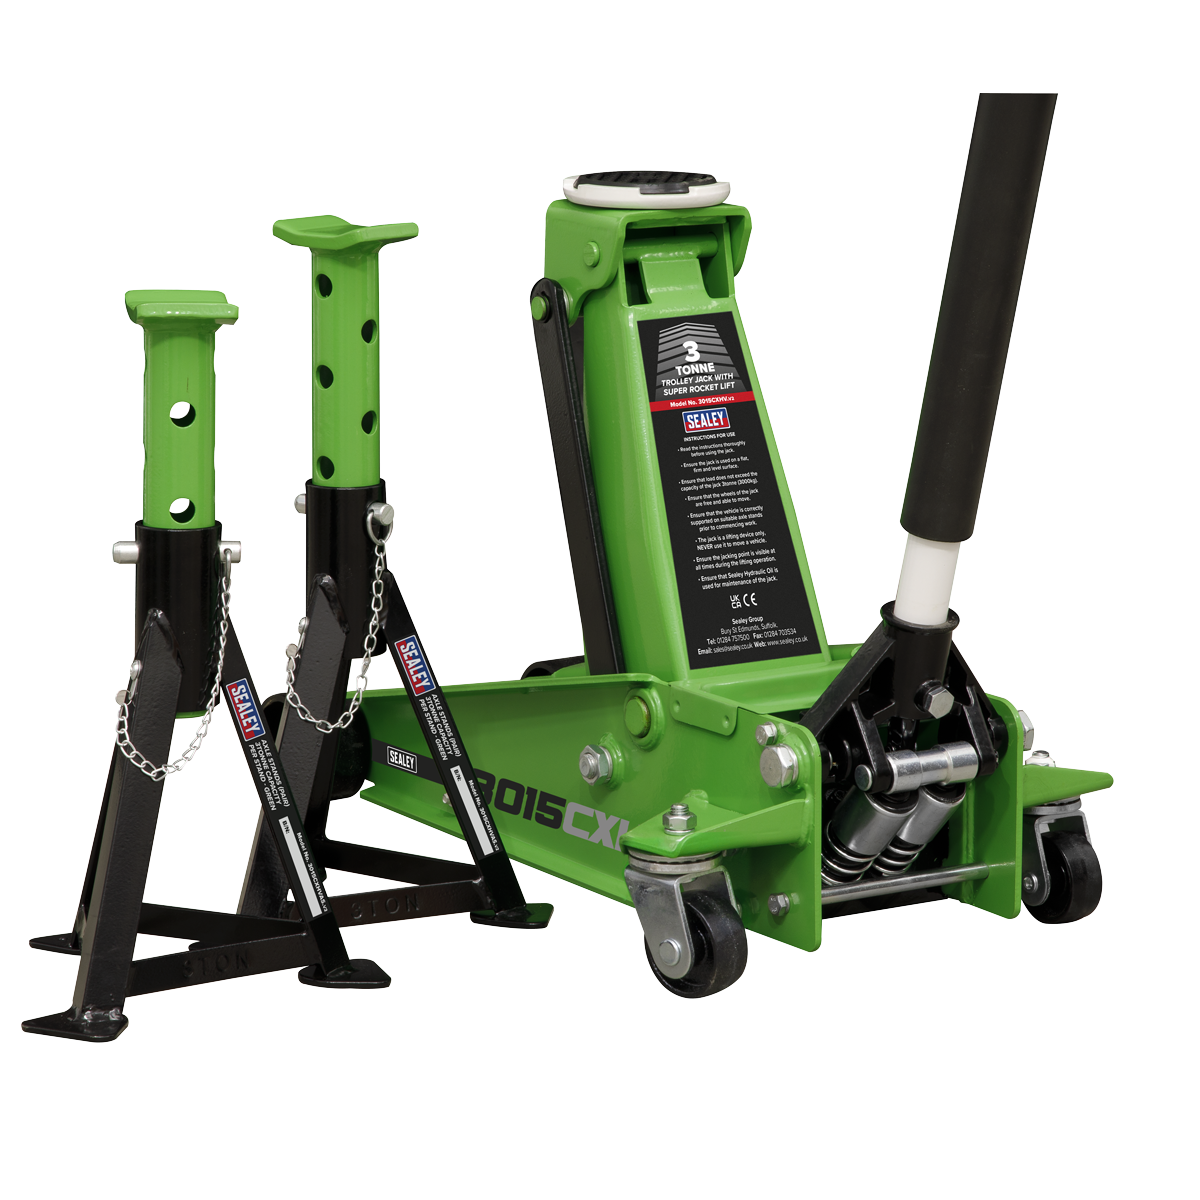 Sealey 3 Ton Trolley Jack & Axle Stand Set 3015CXHV | Universal joint release mechanism allows safer, more controlled lowering of the jack. | toolforce.ie